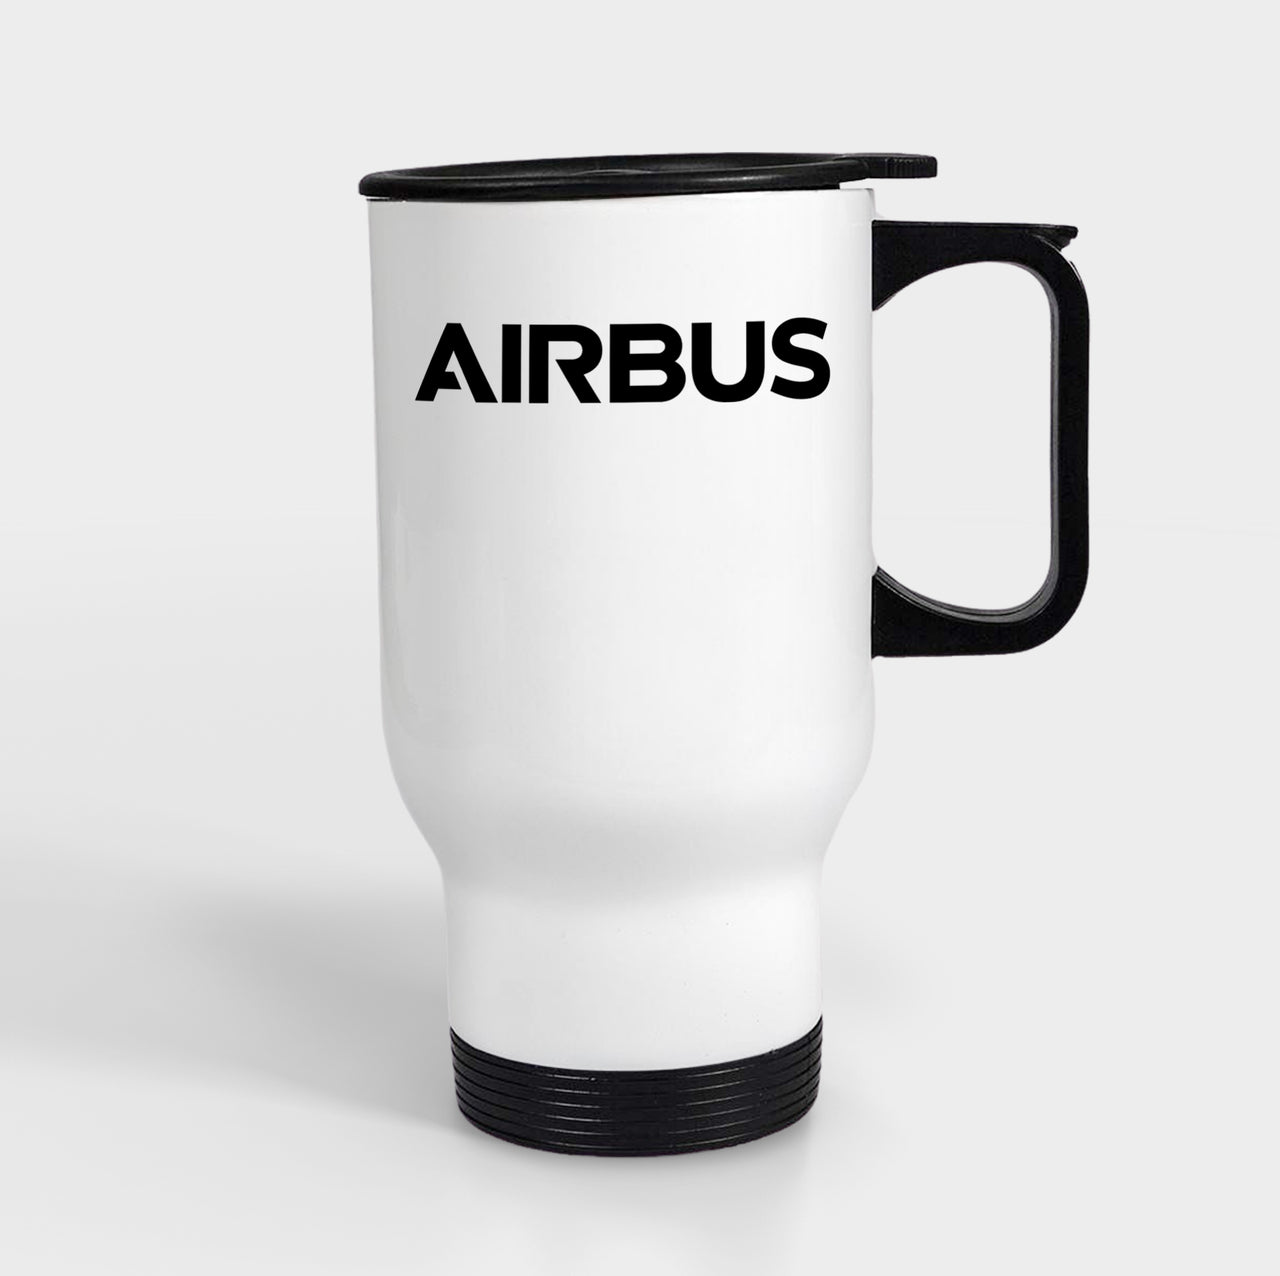 Airbus & Text Designed Travel Mugs (With Holder)